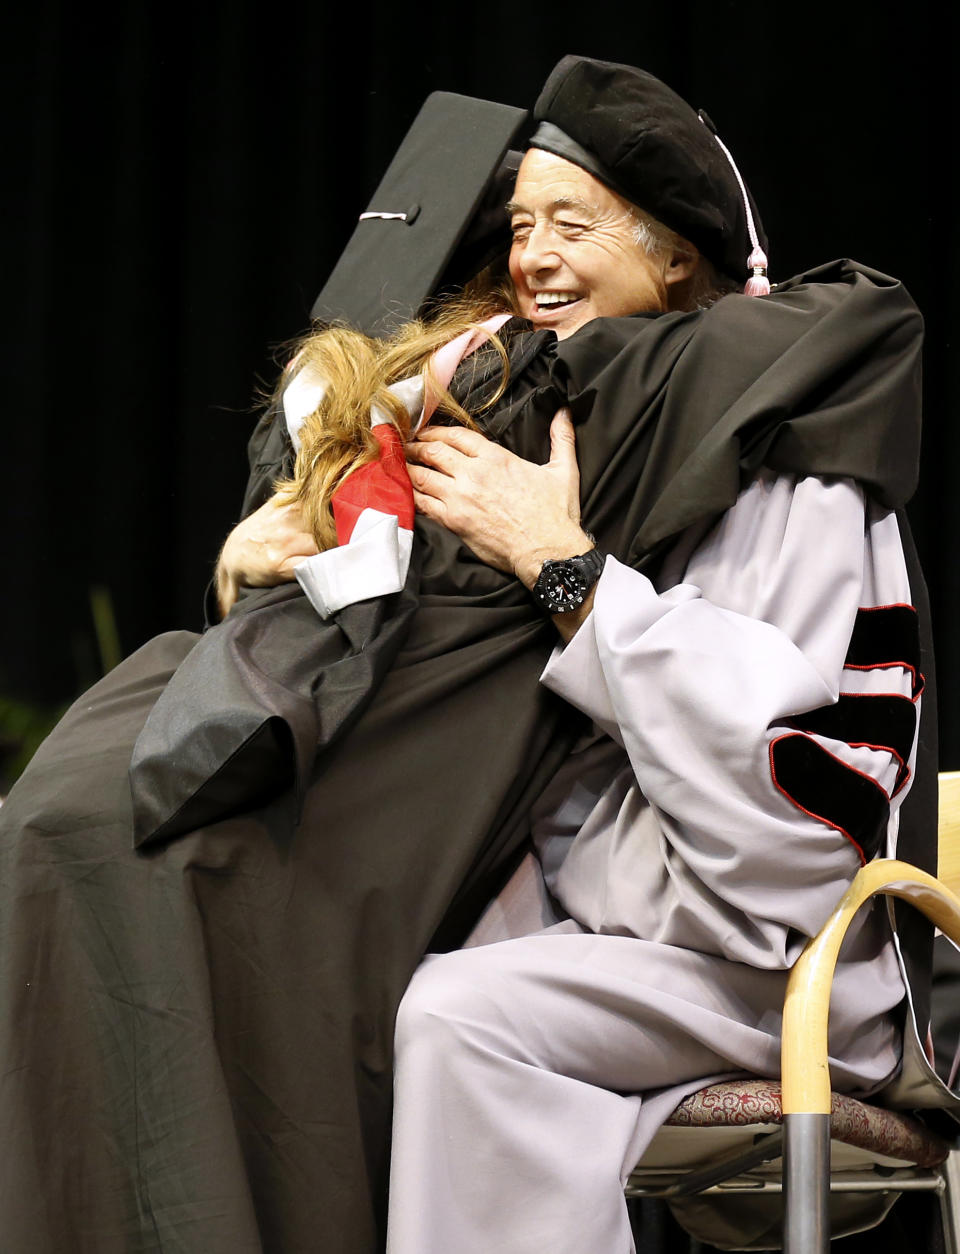 Just before receiving her degree, Berklee College of Music graduate Eden Forman of Gloucester, Mass. hugs former Led Zeppelin guitarist Jimmy Page, who received an honorary degree of Doctor of Music from the school during their commencement in Boston, Saturday, May 10. 2014. (AP Photo/Winslow Townson)